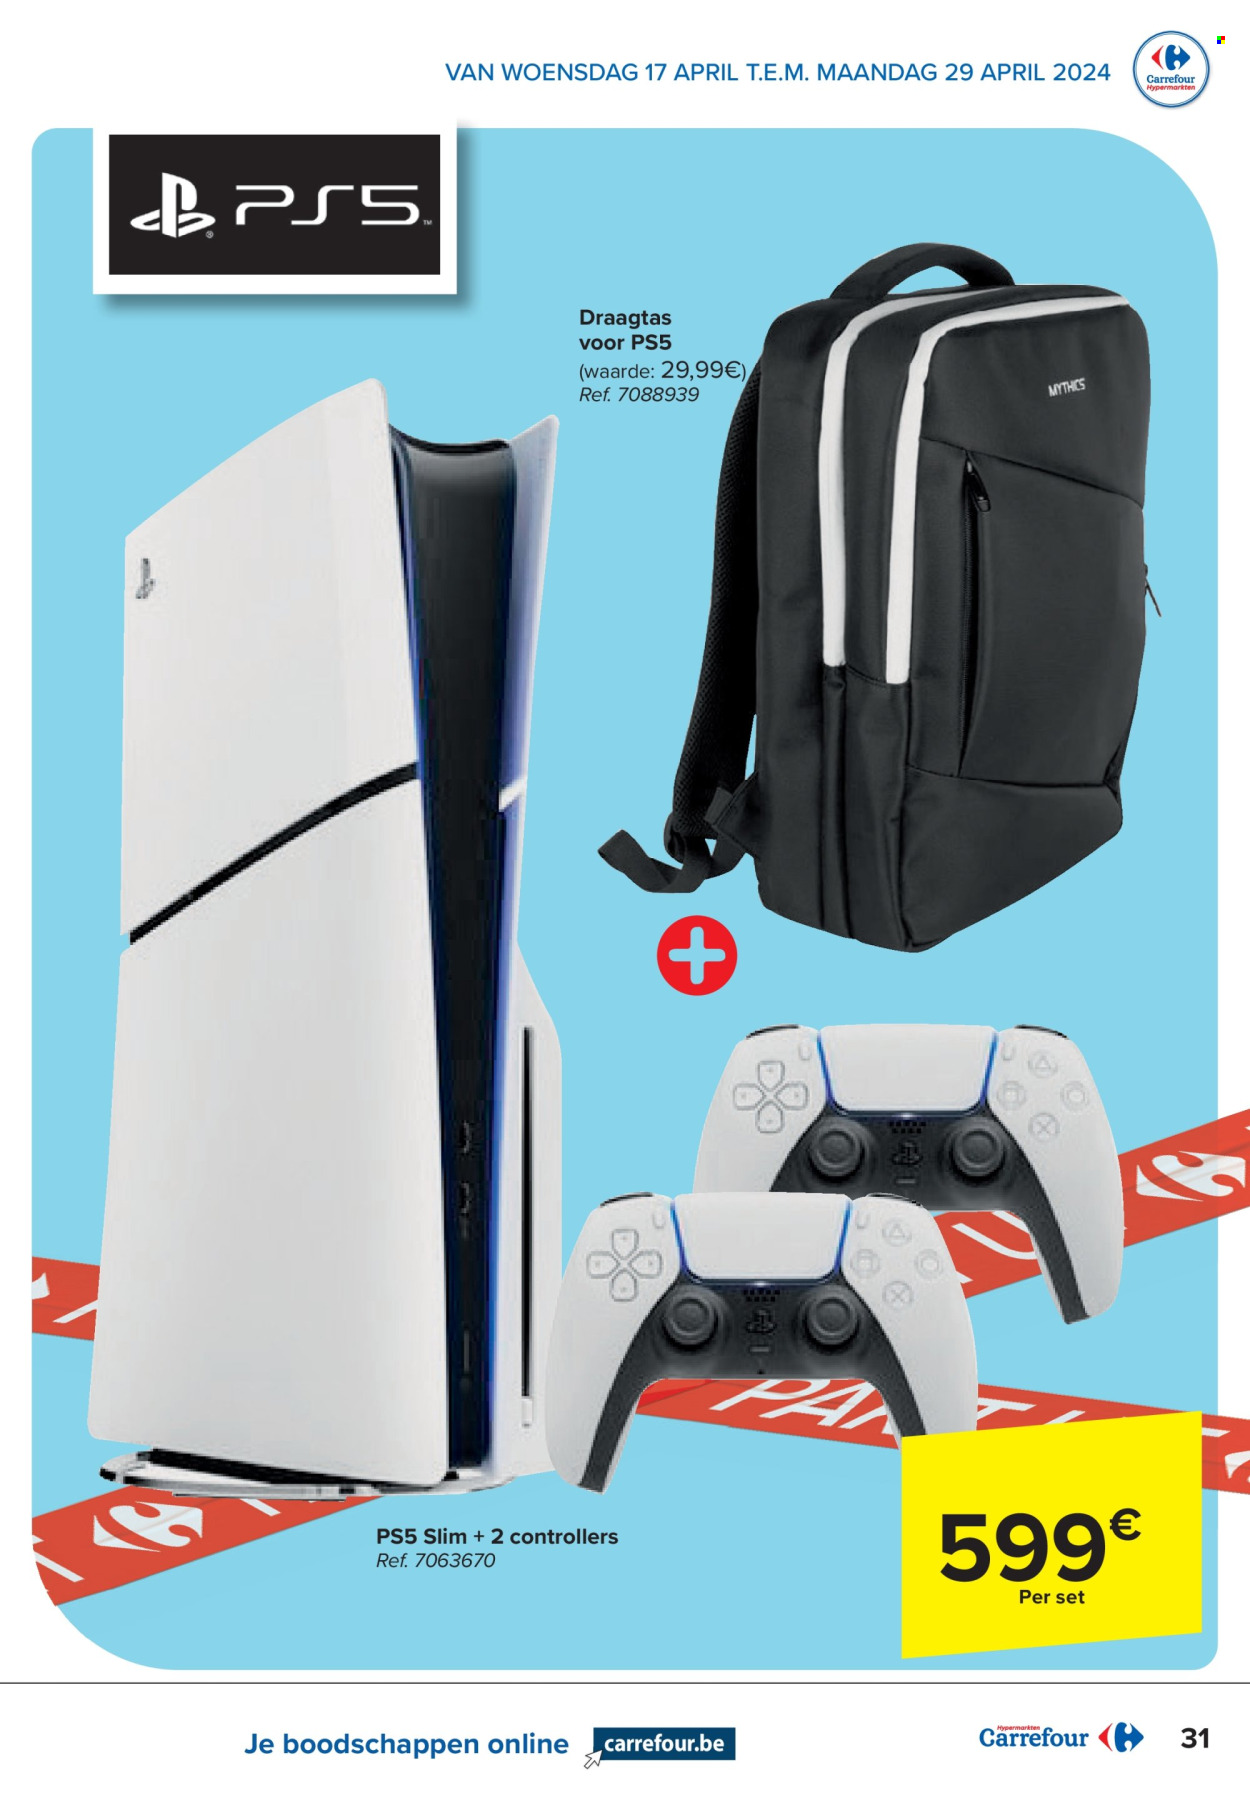 Catalogue Carrefour hypermarkt - 17.4.2024 - 29.4.2024. Page 31.